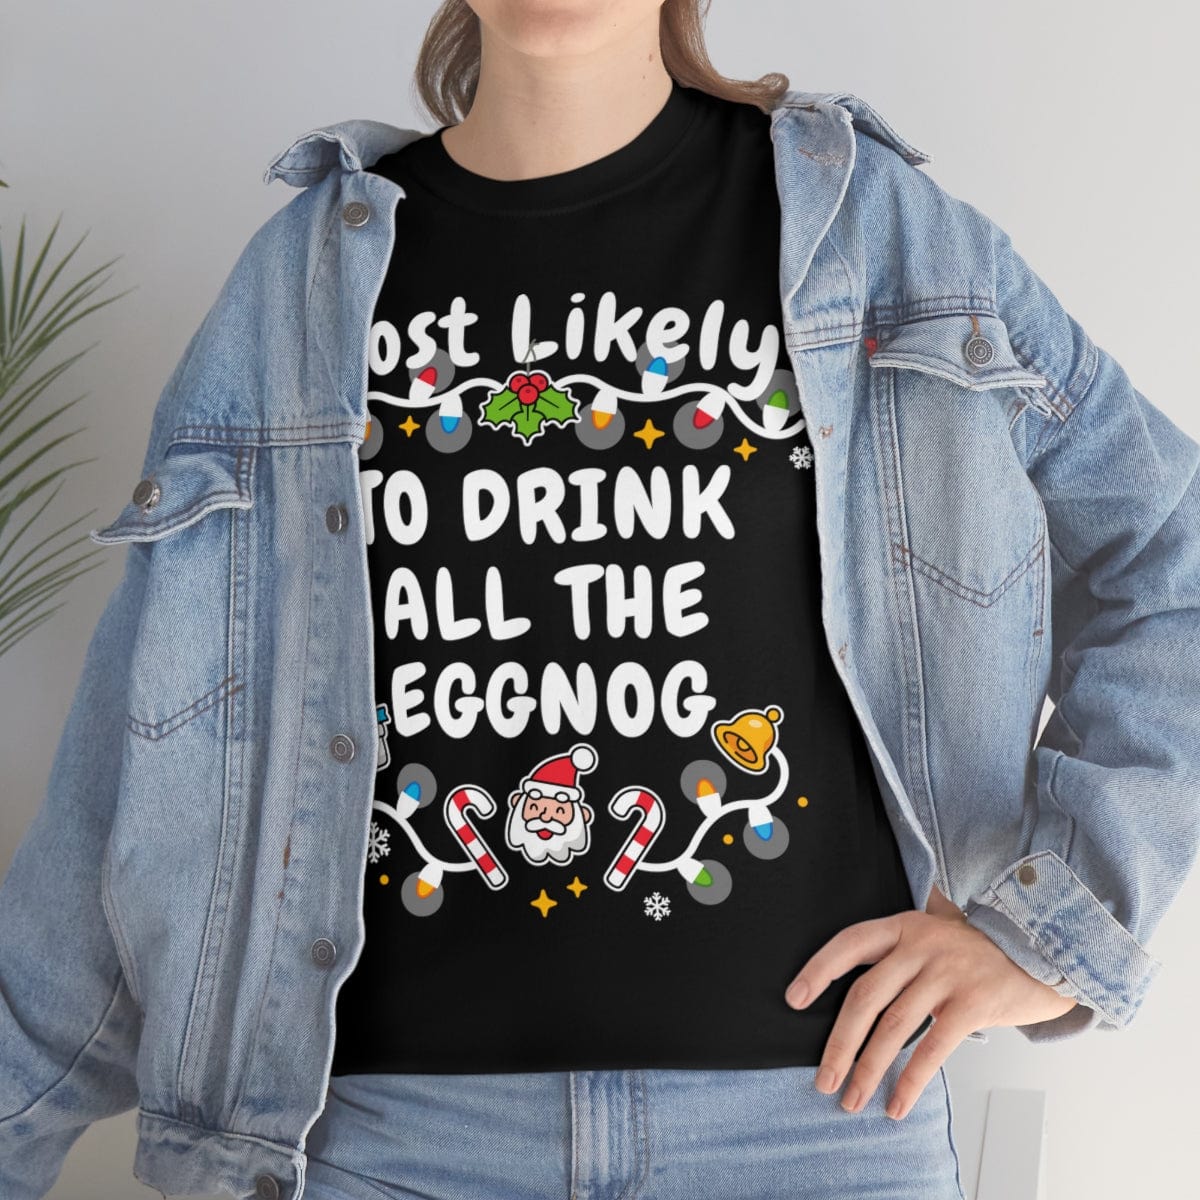 TO DRINK ALL THE EGGNOG